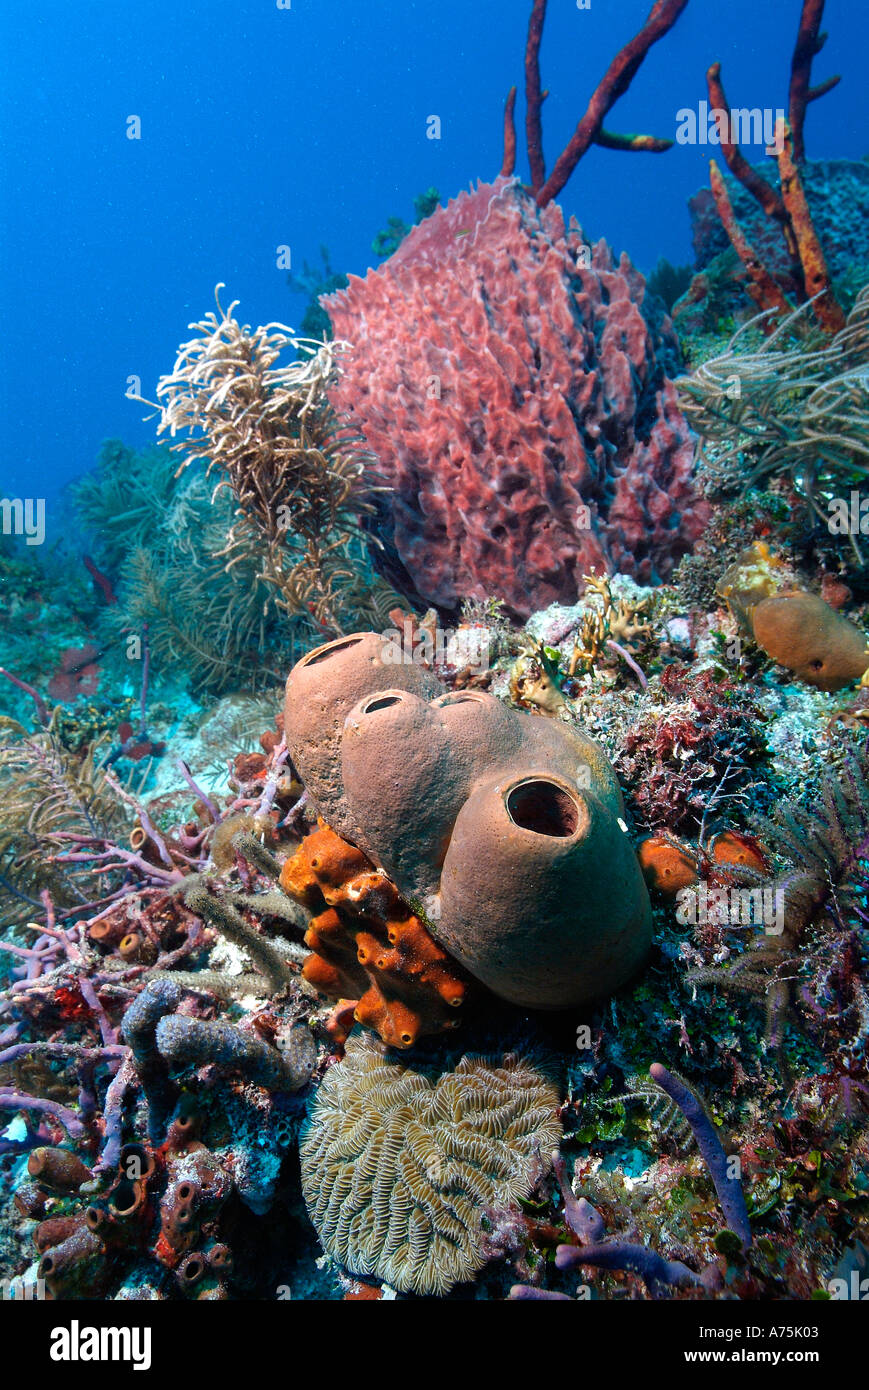 Reef covered with coral and sponges in Florida Stock Photo